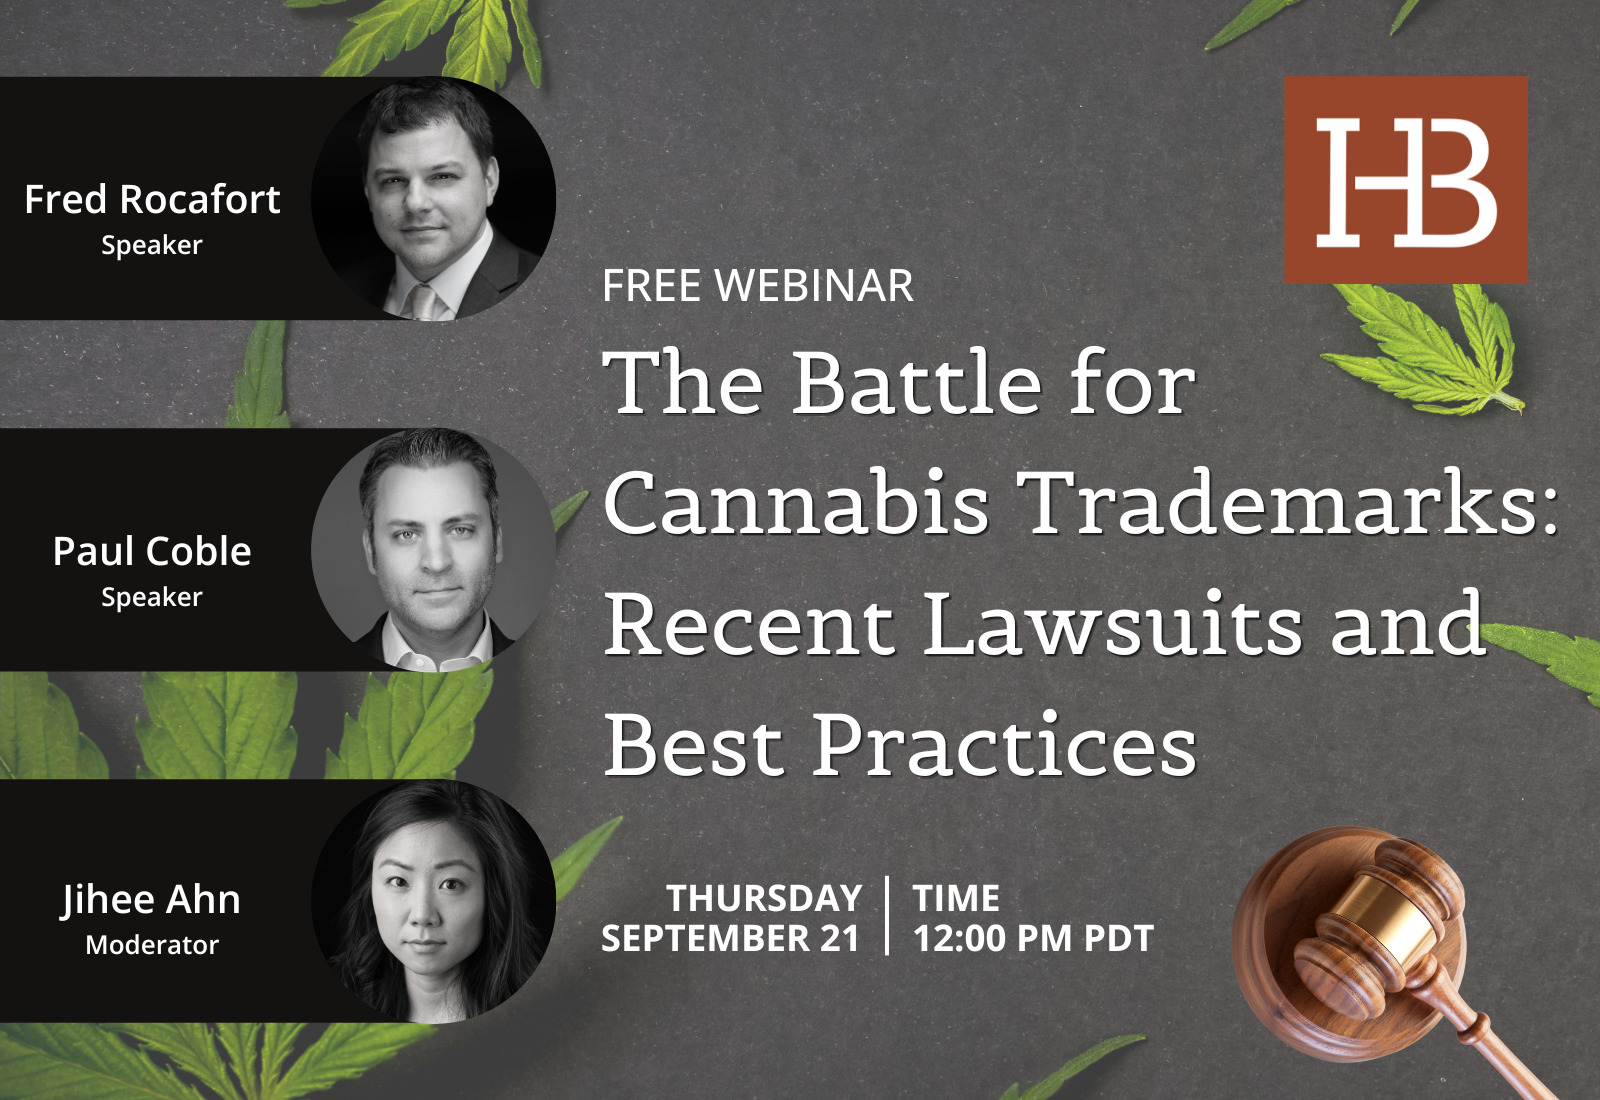 FREE Webinar This Thursday, September 21st: Cannabis Trademarks and Litigation